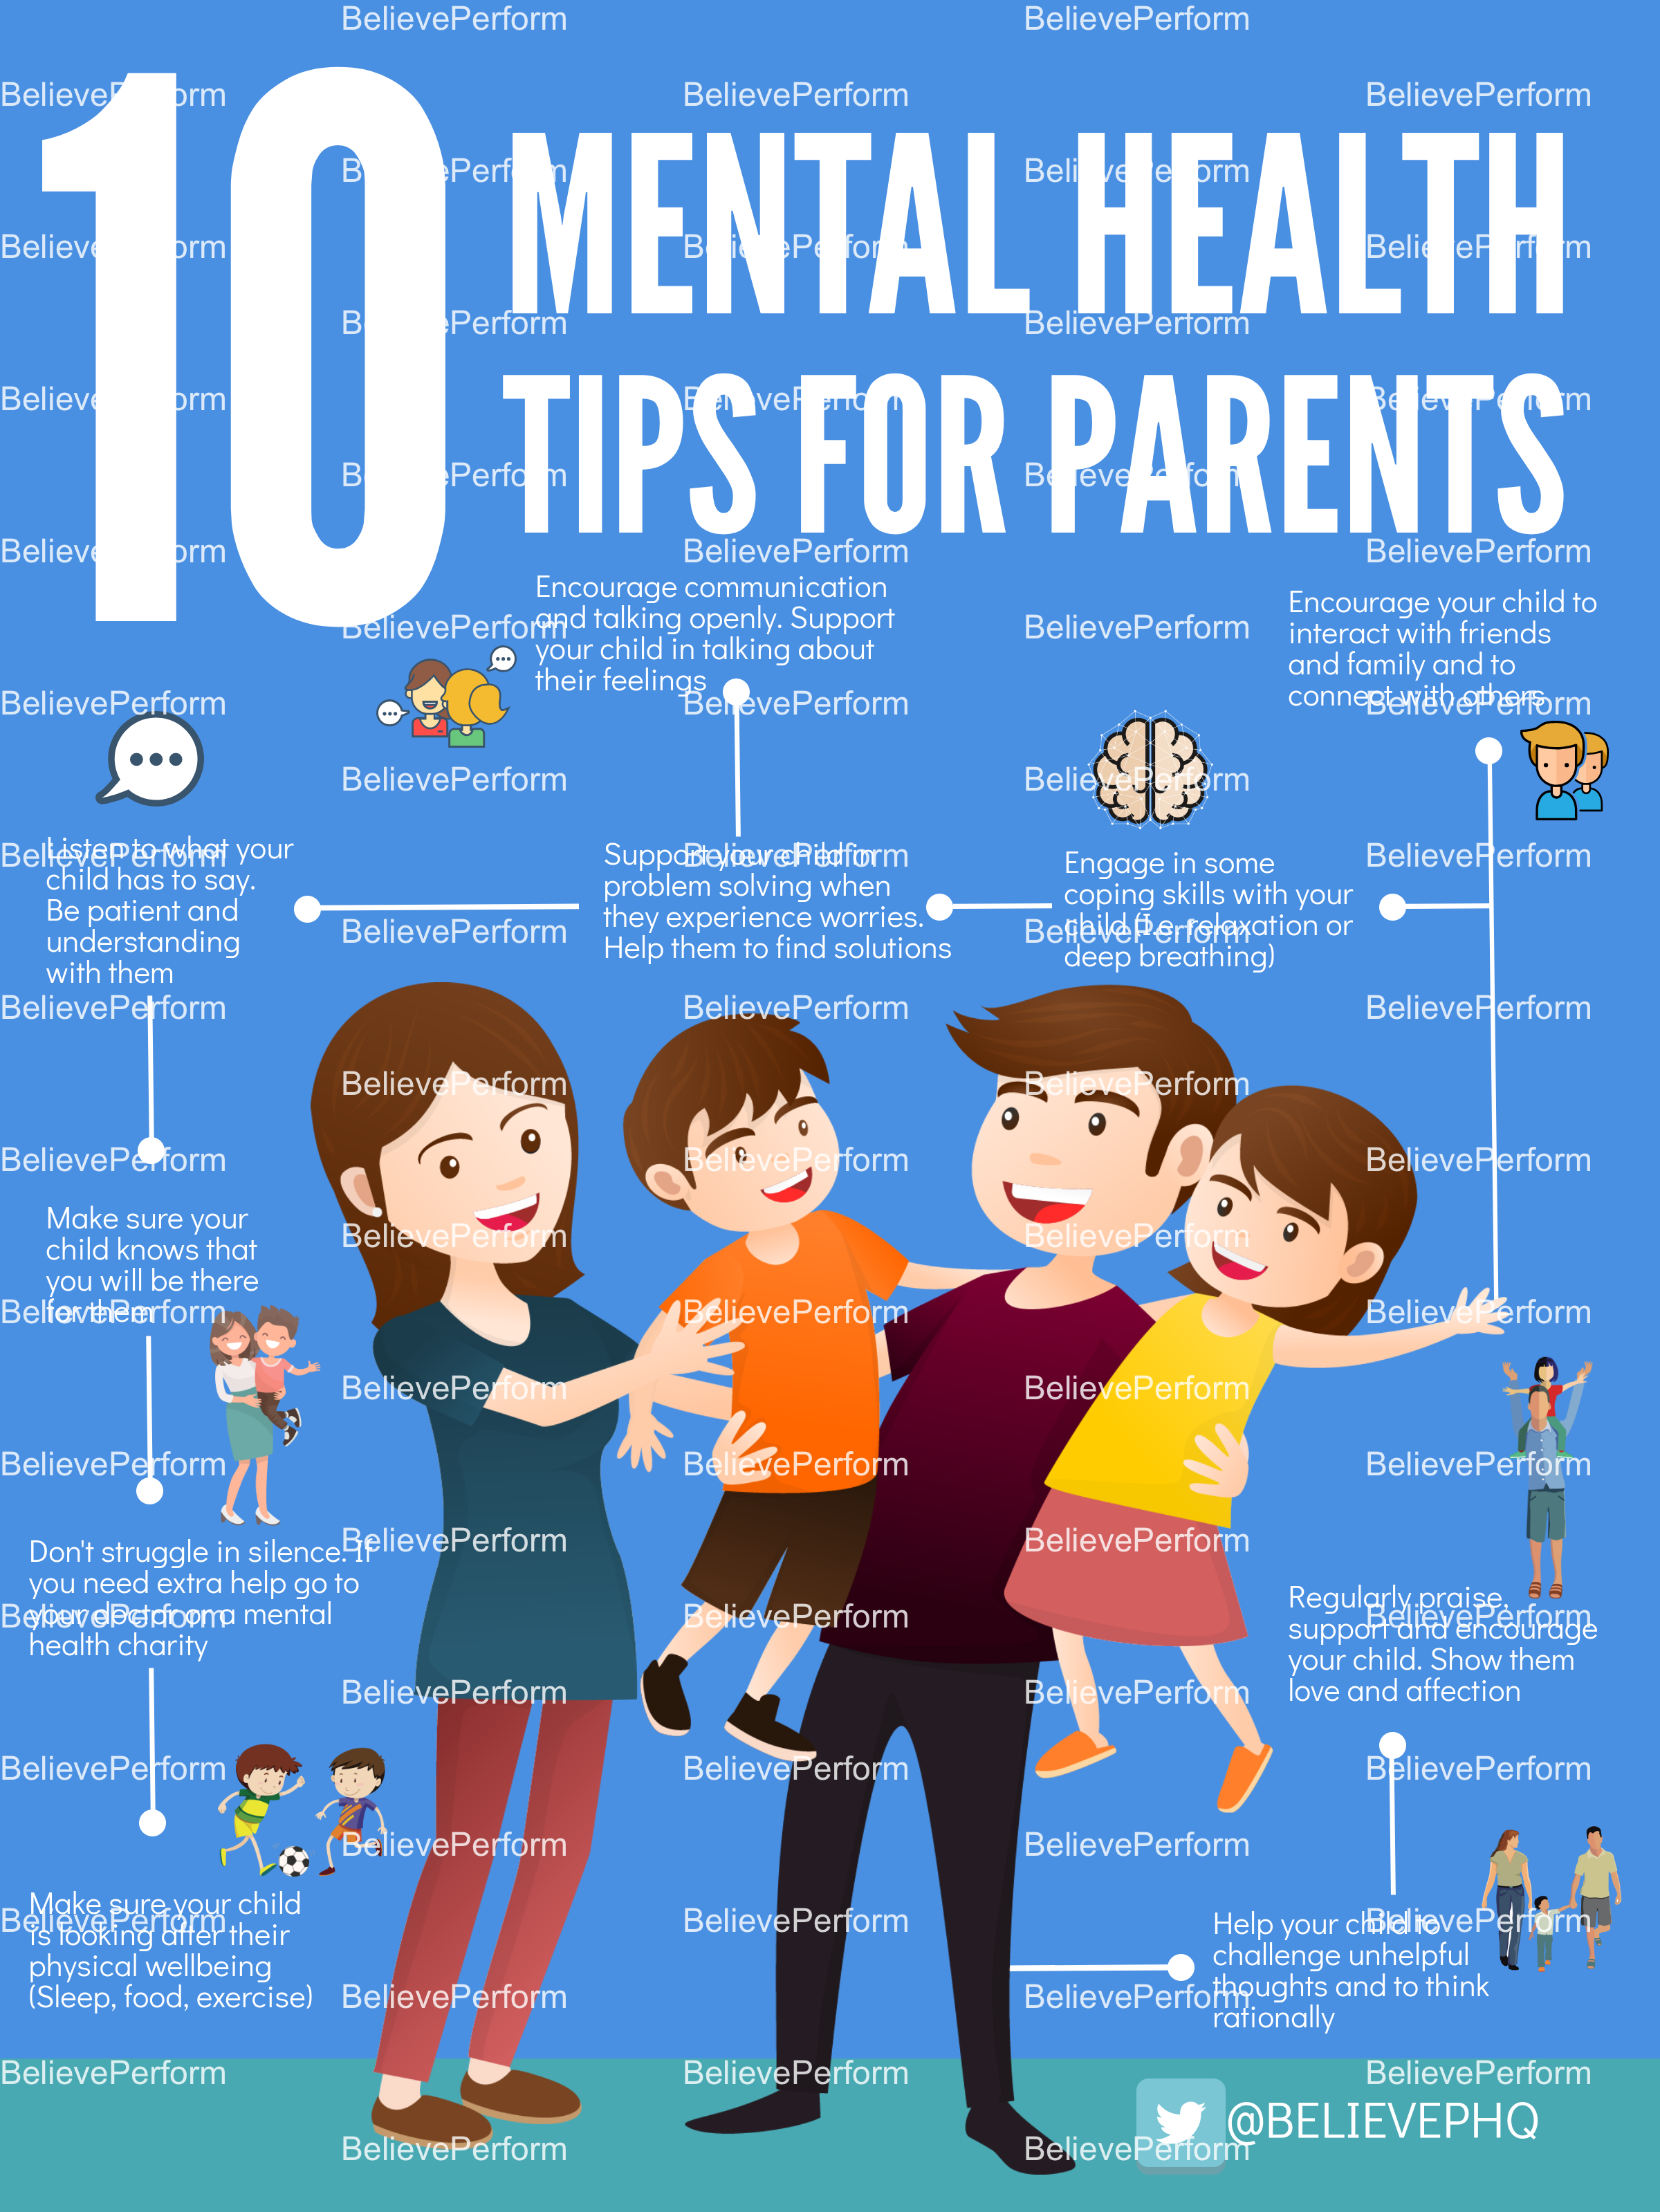 10 mental health tips for parents BelievePerform The